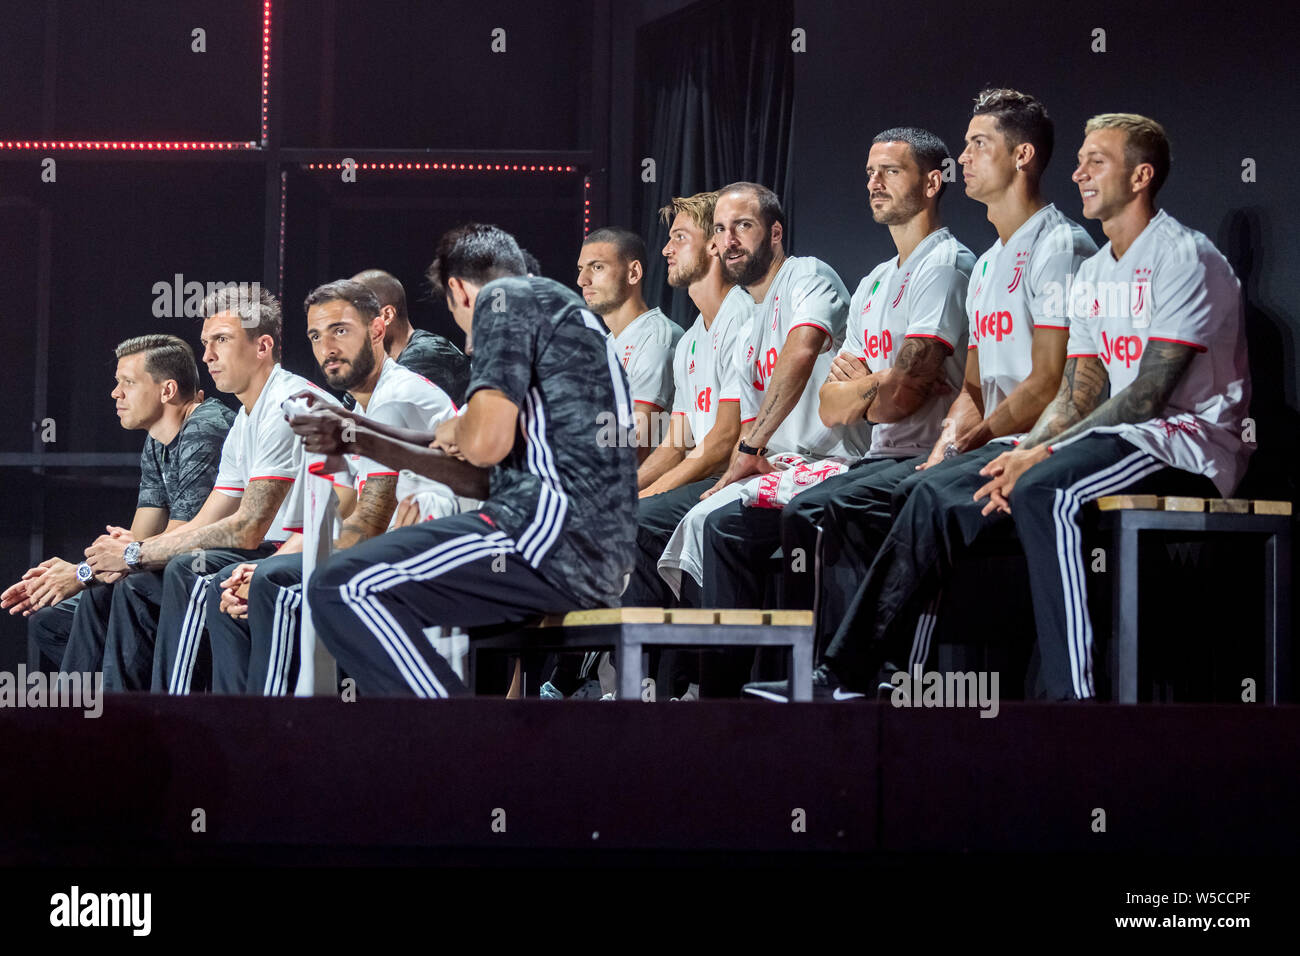 Players of Juventus F.C. attend a press conference to launch new 2019/20 Away Kit during the 2019 International Champions Cup football tournament in Shanghai, China, 25 July 2019. Stock Photo